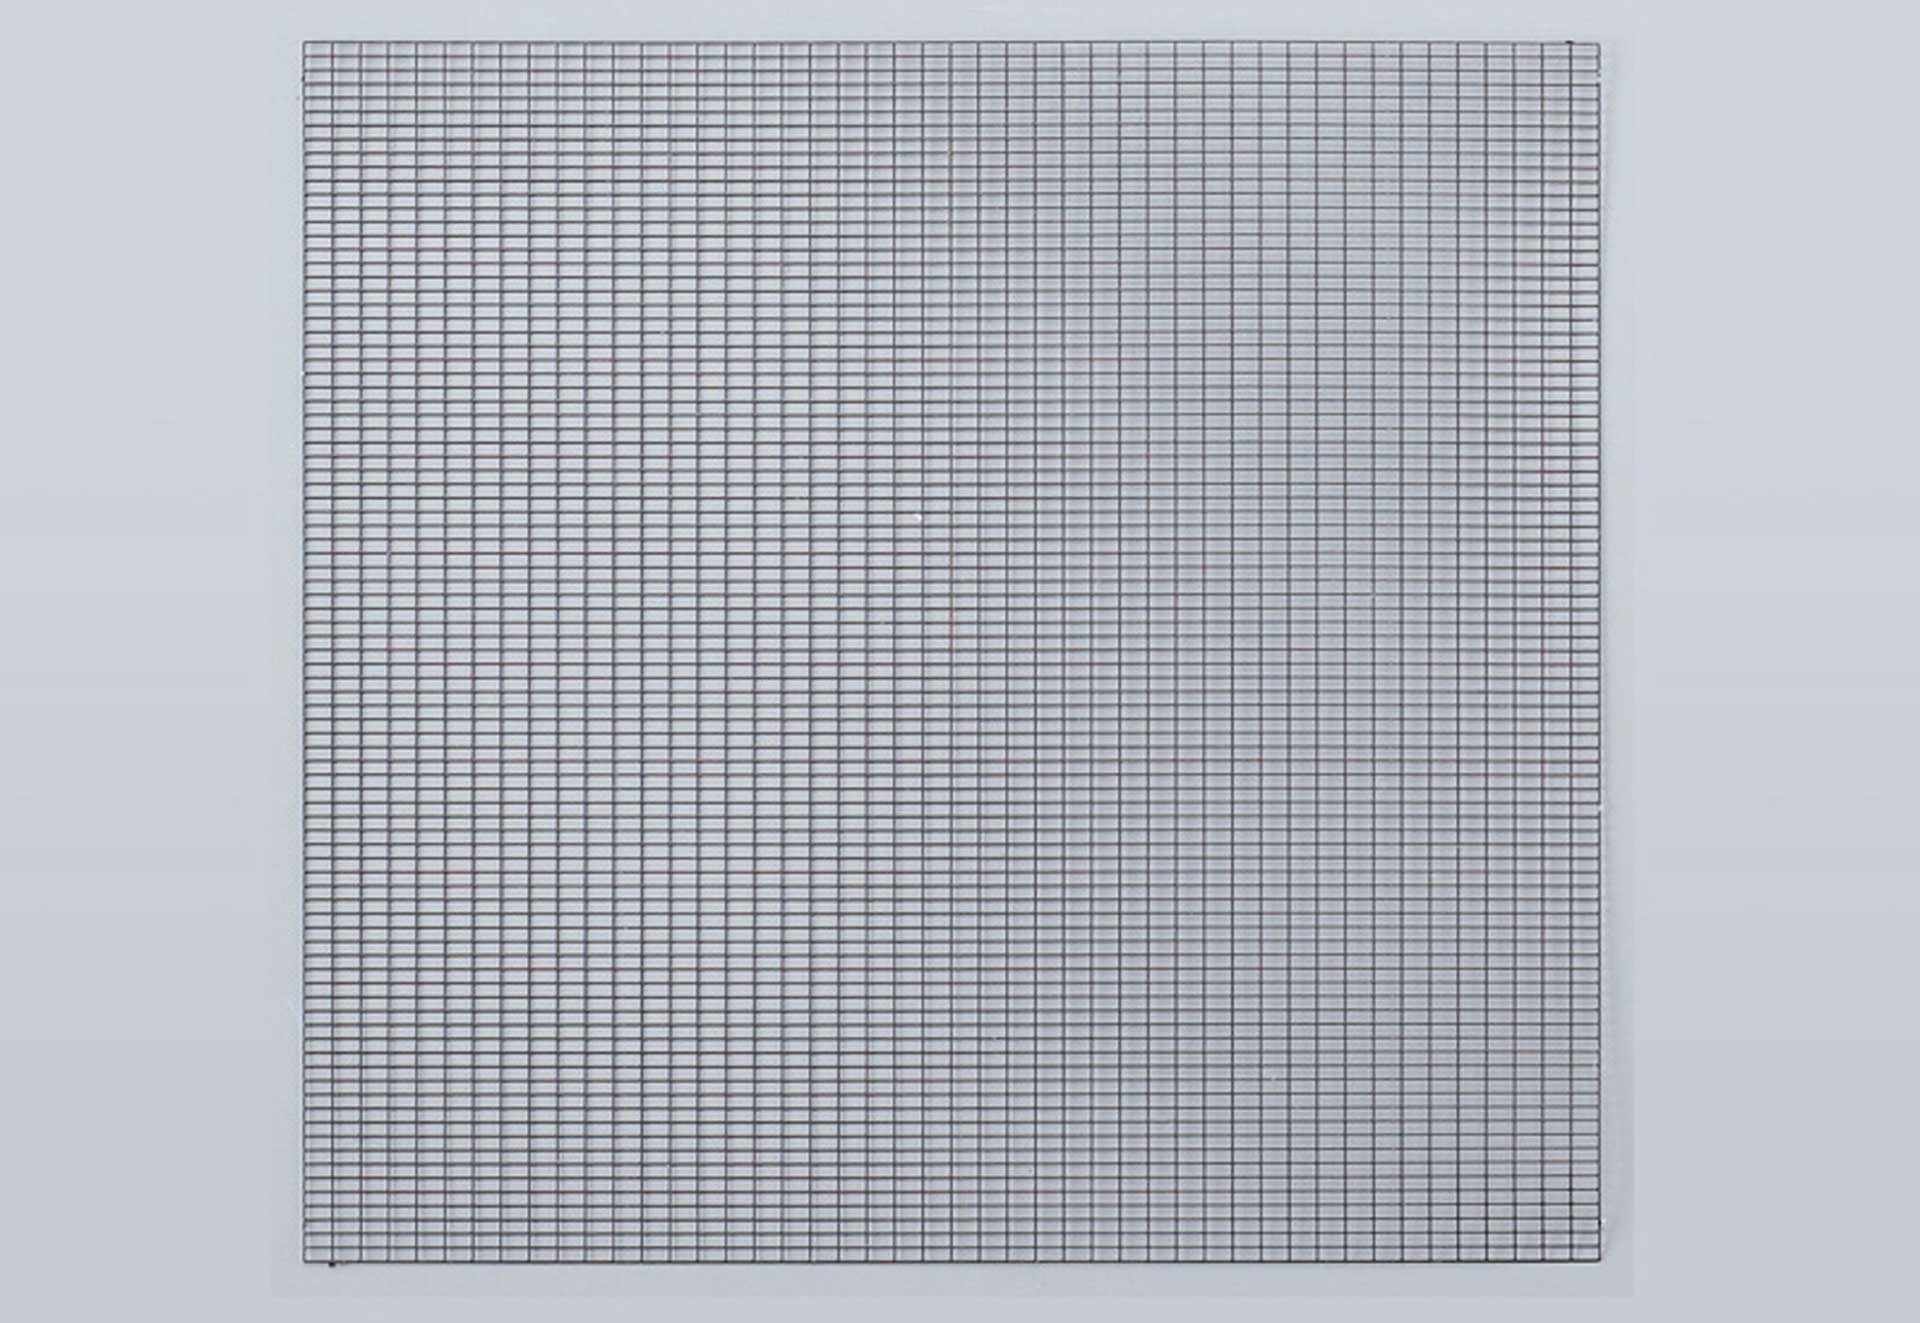 KILLER BODY Stainless steel plate / grid type square